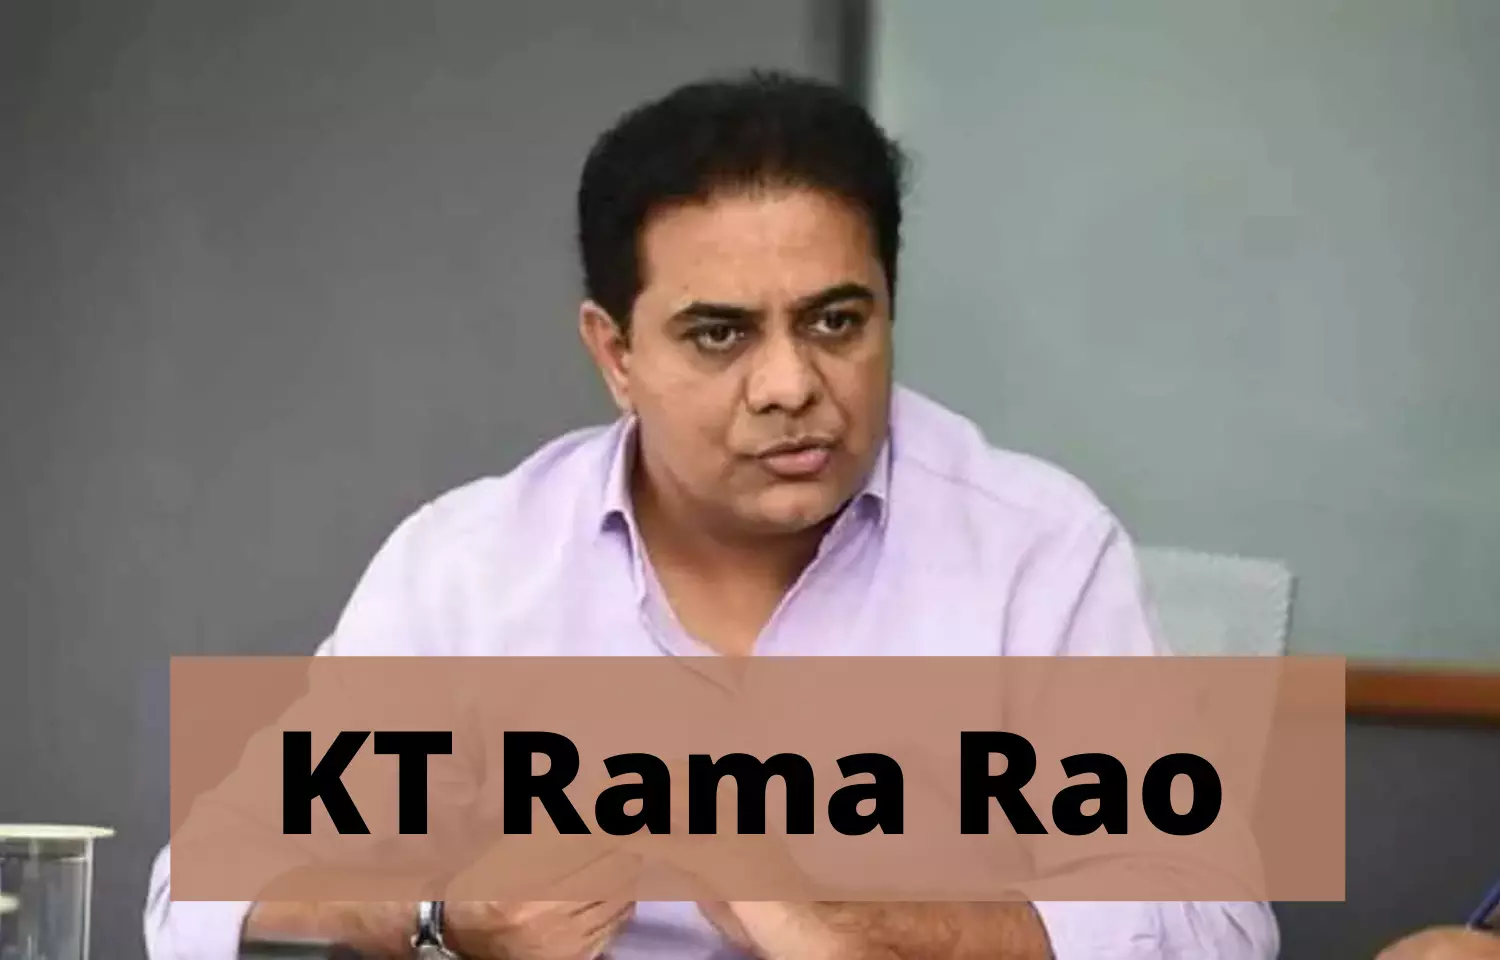 Centre did injustice to Telangana in allocation of Bulk Drug parks: KT Rama Rao